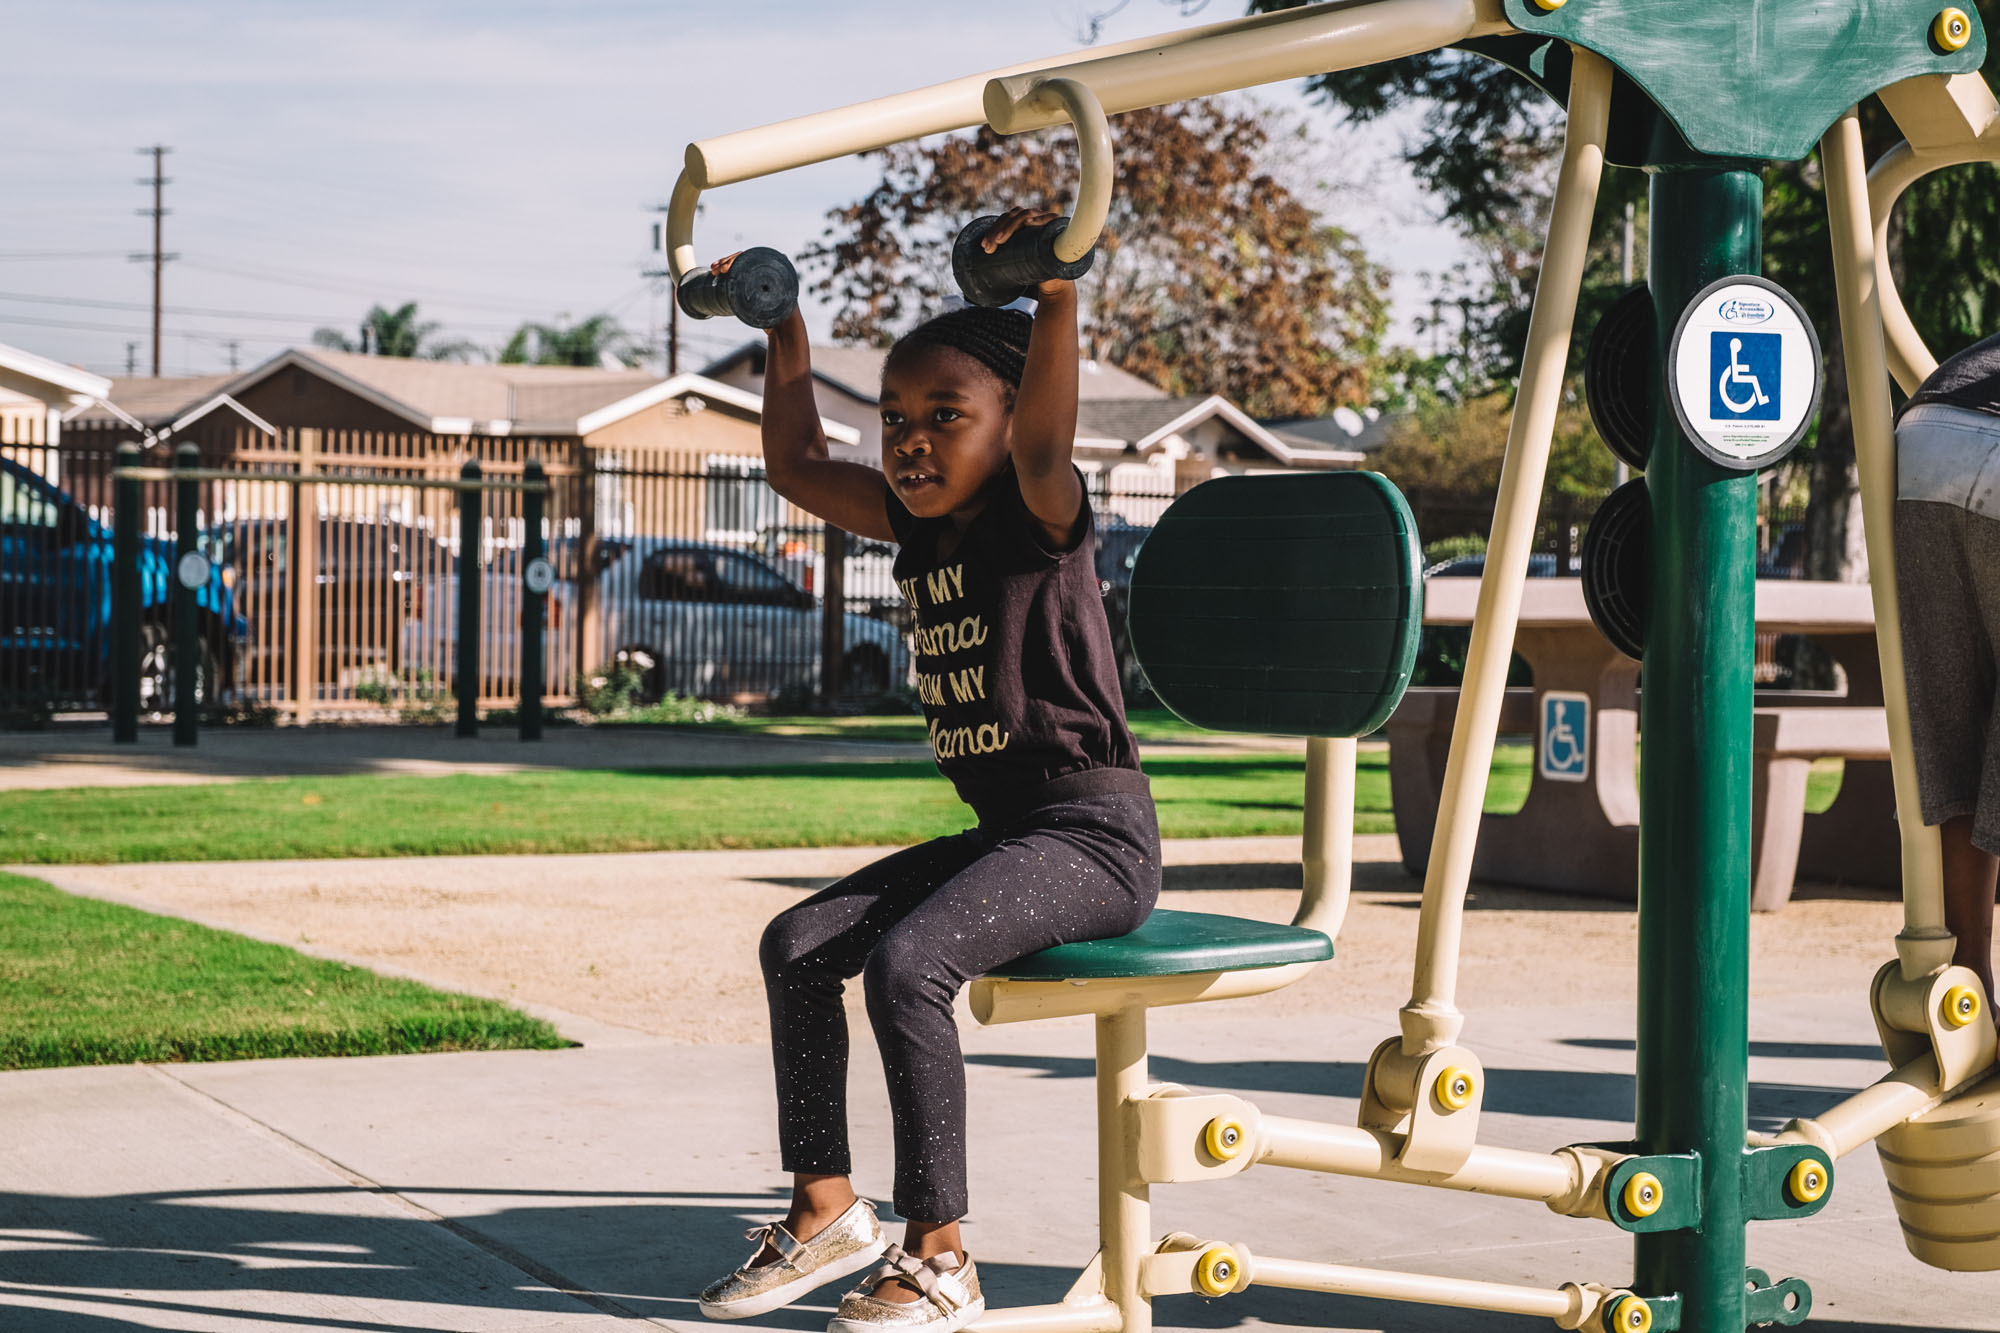 A child uses exercise equipment outdoors in a park